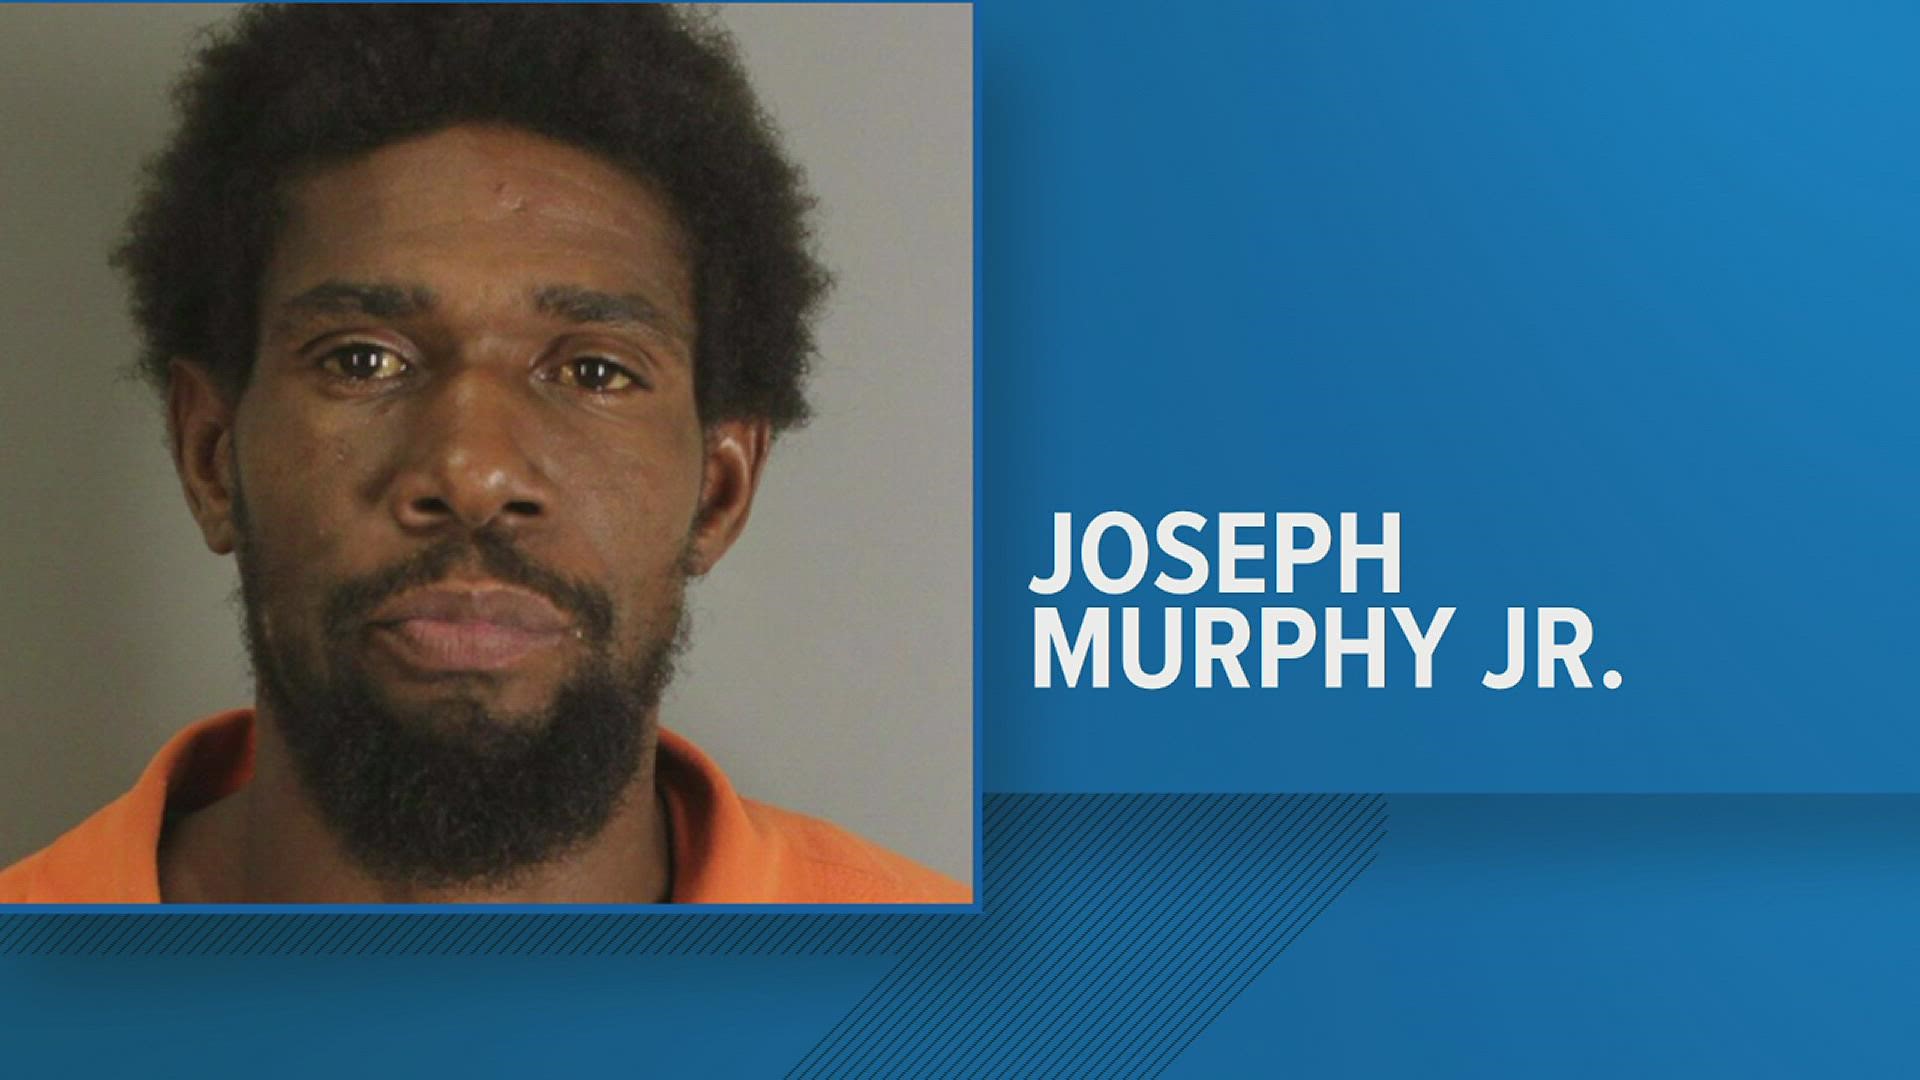 Joseph Raymond Murphy is accused of assaulting Beaumont Police officers while they were trying to arrest him.